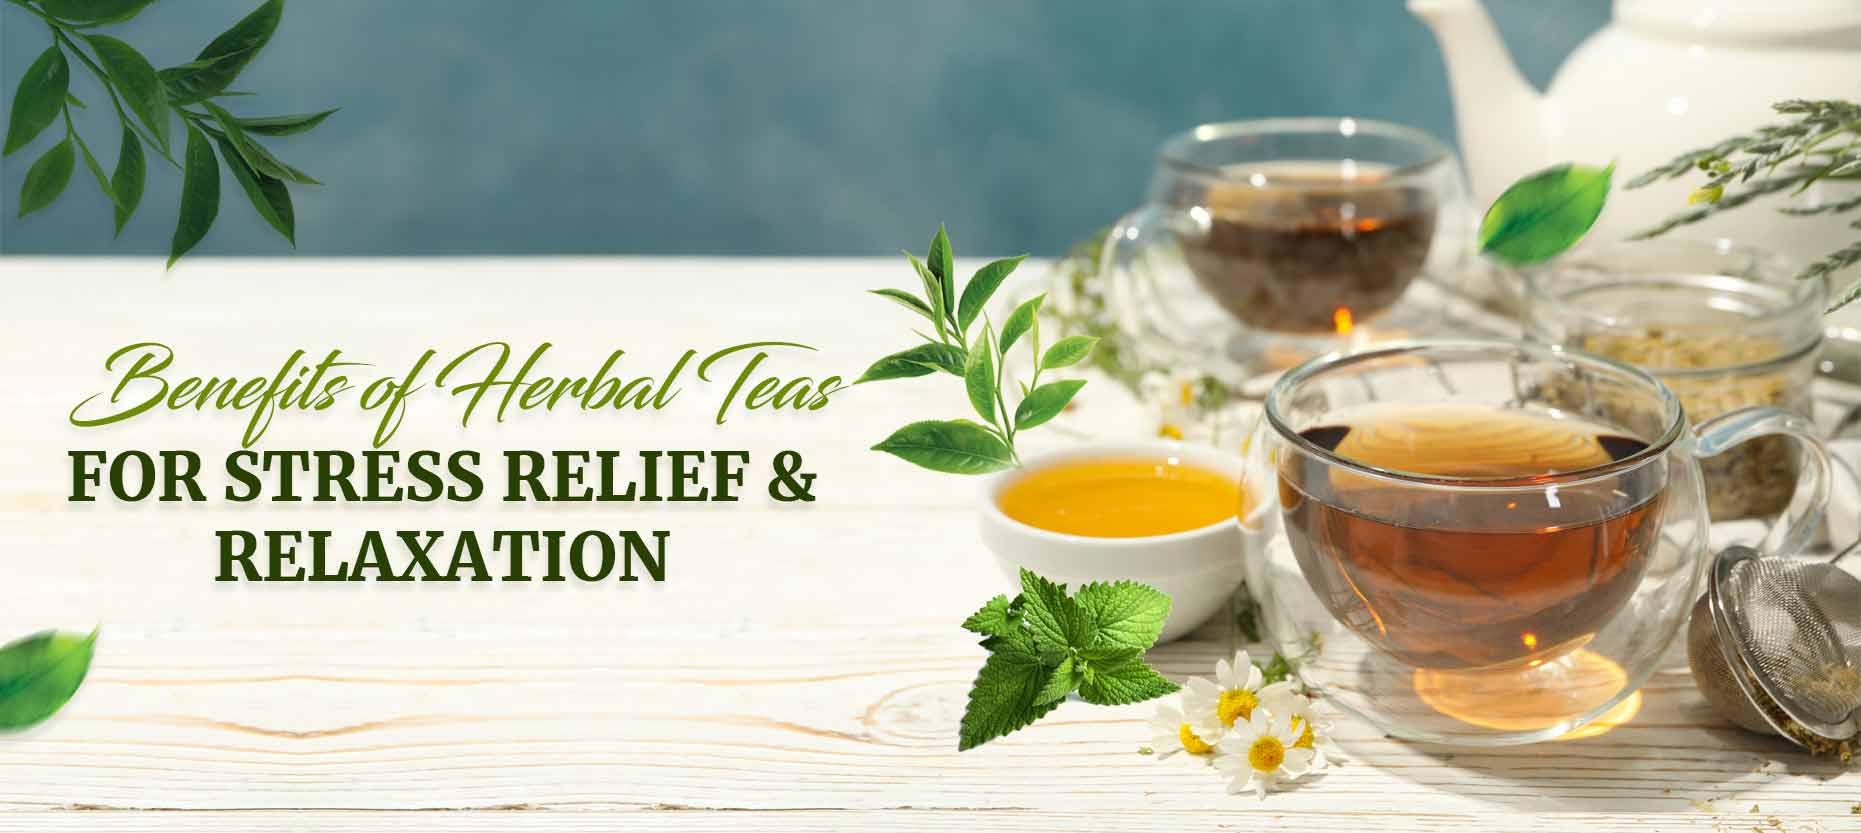 Benefits of Herbal Teas for Stress Relief and Relaxation